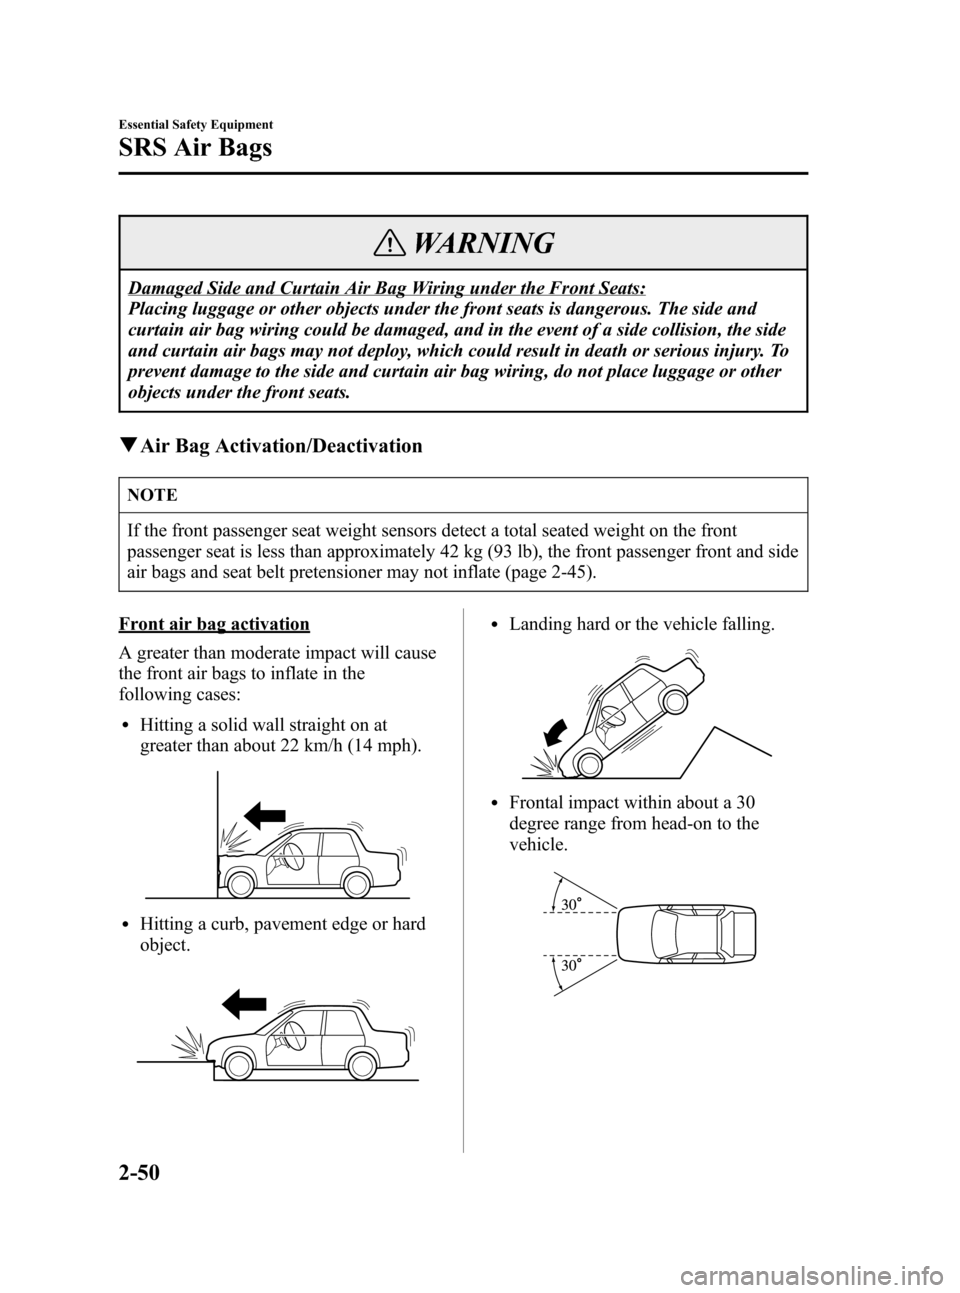 MAZDA MODEL 3 HATCHBACK 2006   (in English) Repair Manual Black plate (64,1)
WARNING
Damaged Side and Curtain Air Bag Wiring under the Front Seats:
Placing luggage or other objects under the front seats is dangerous. The side and
curtain air bag wiring could